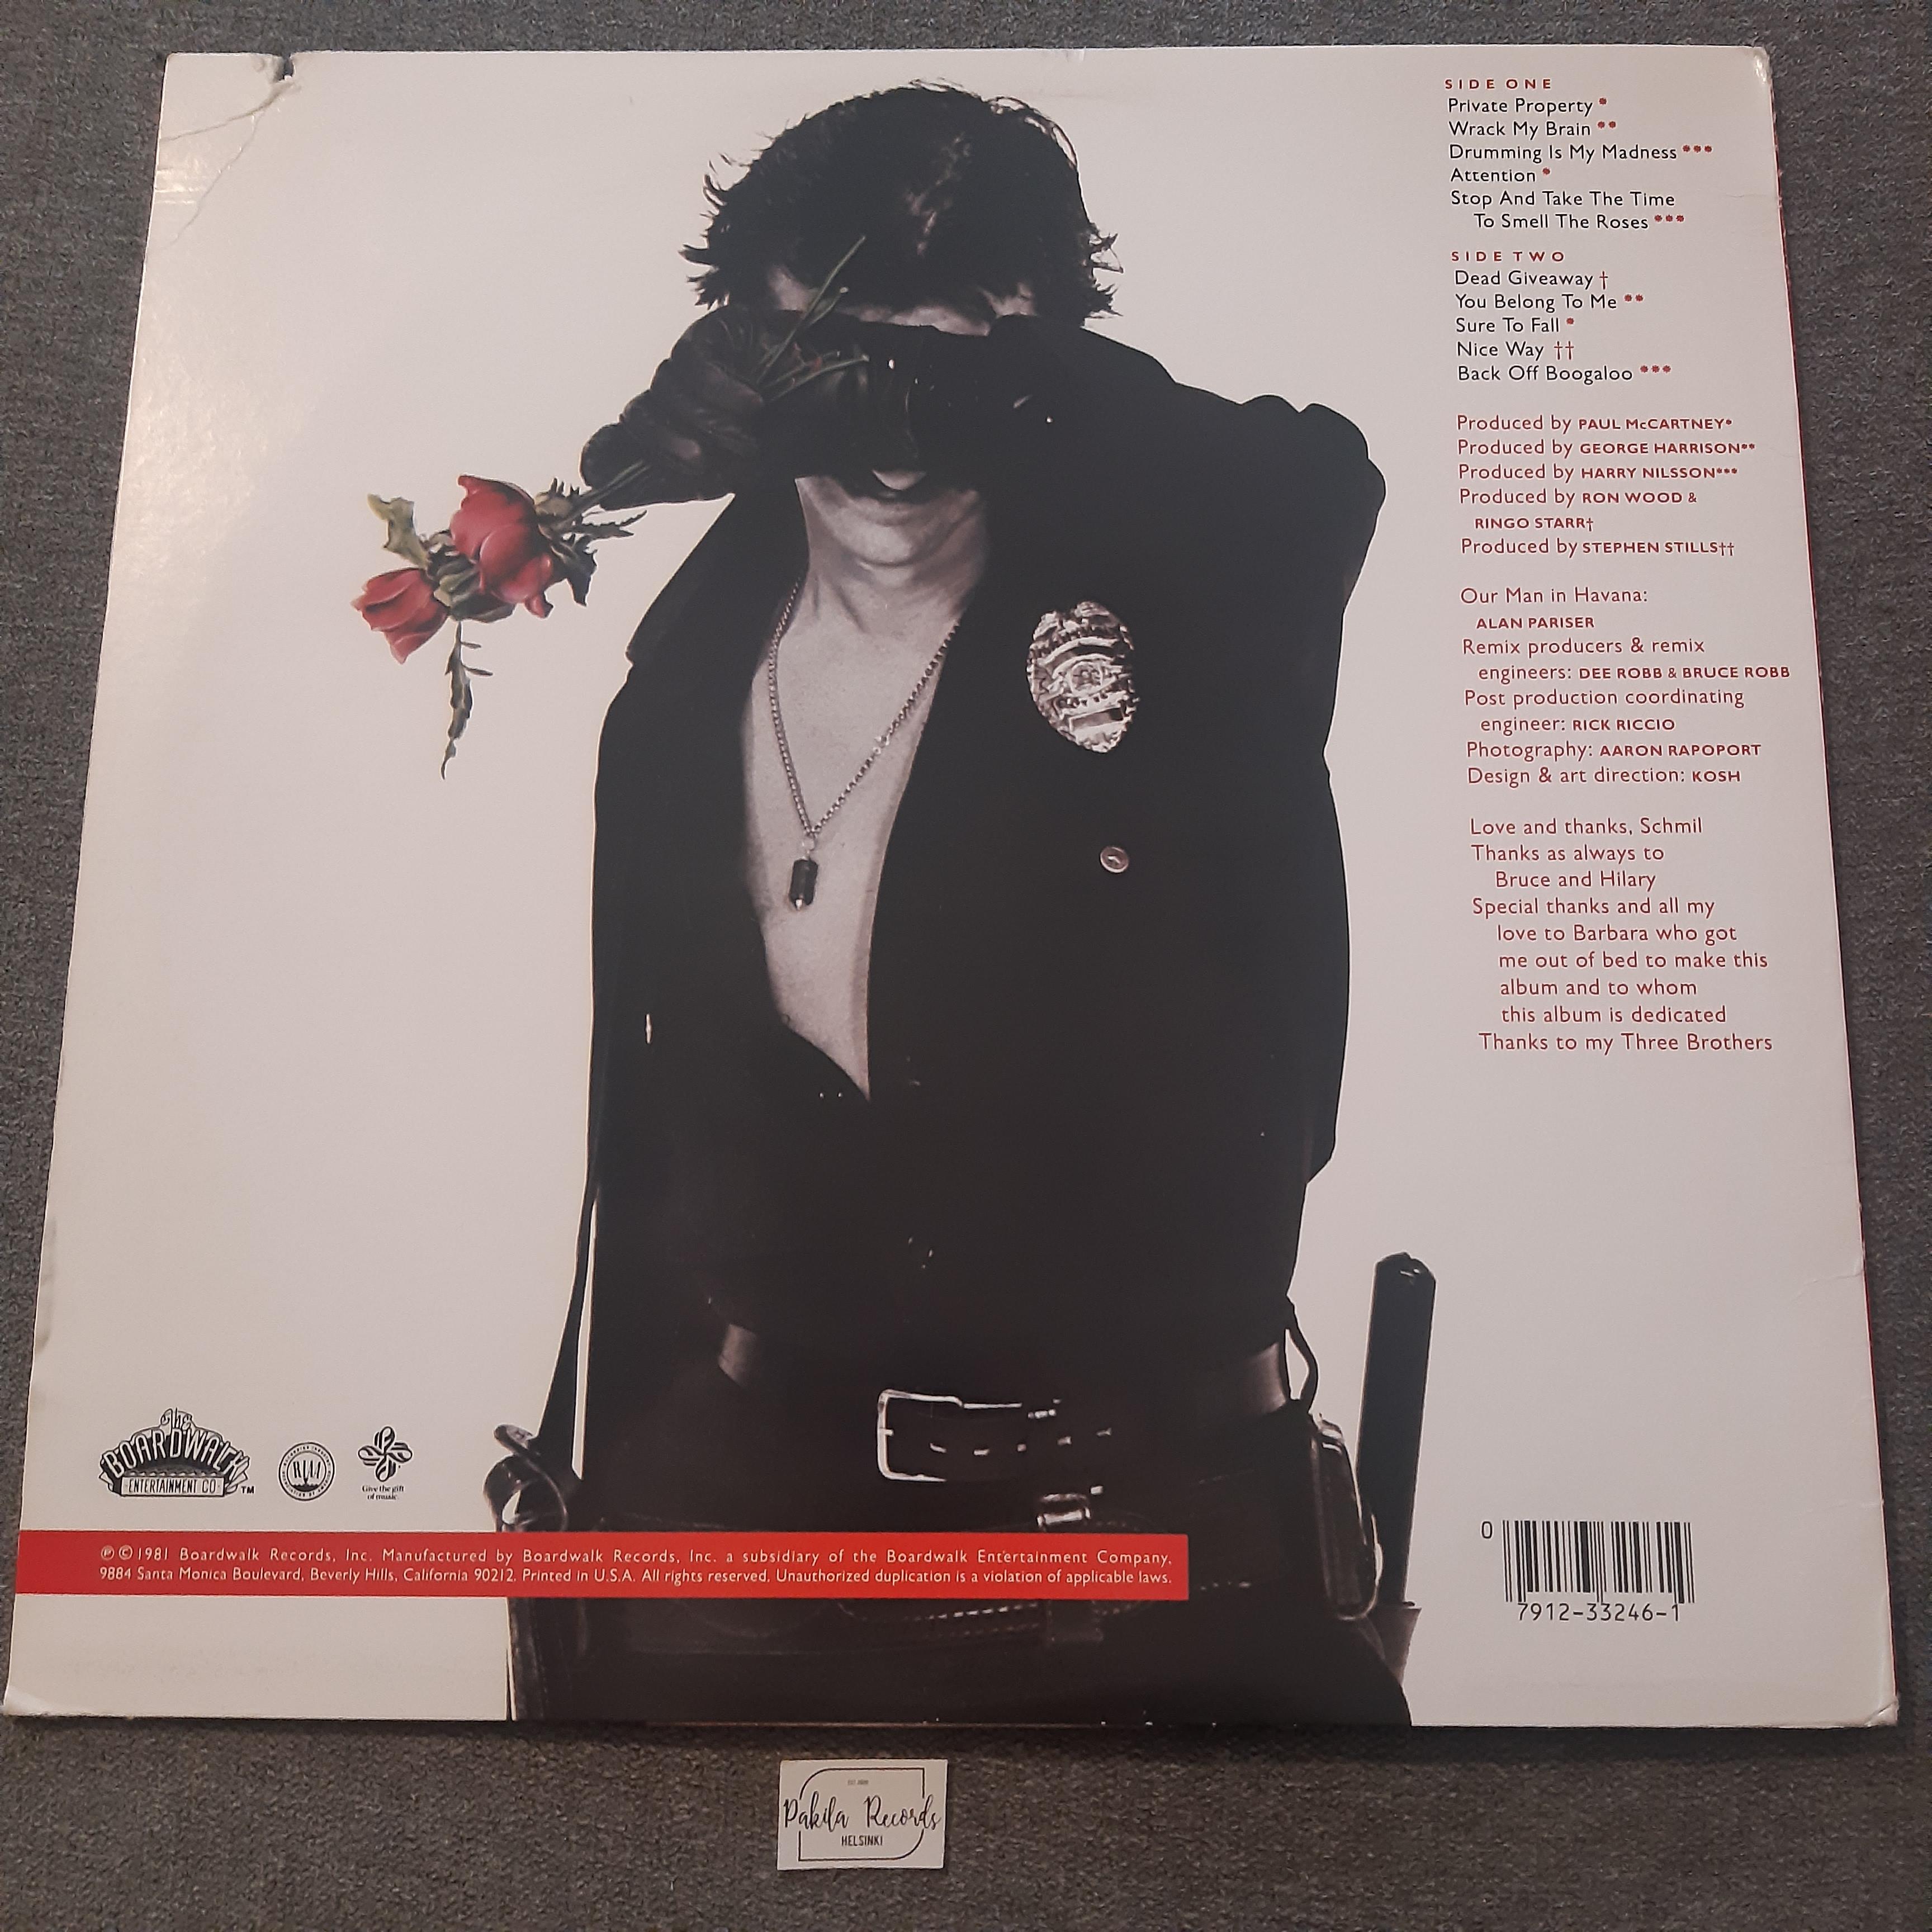 Ringo Starr - Stop And Smell The Roses - LP (käytetty)